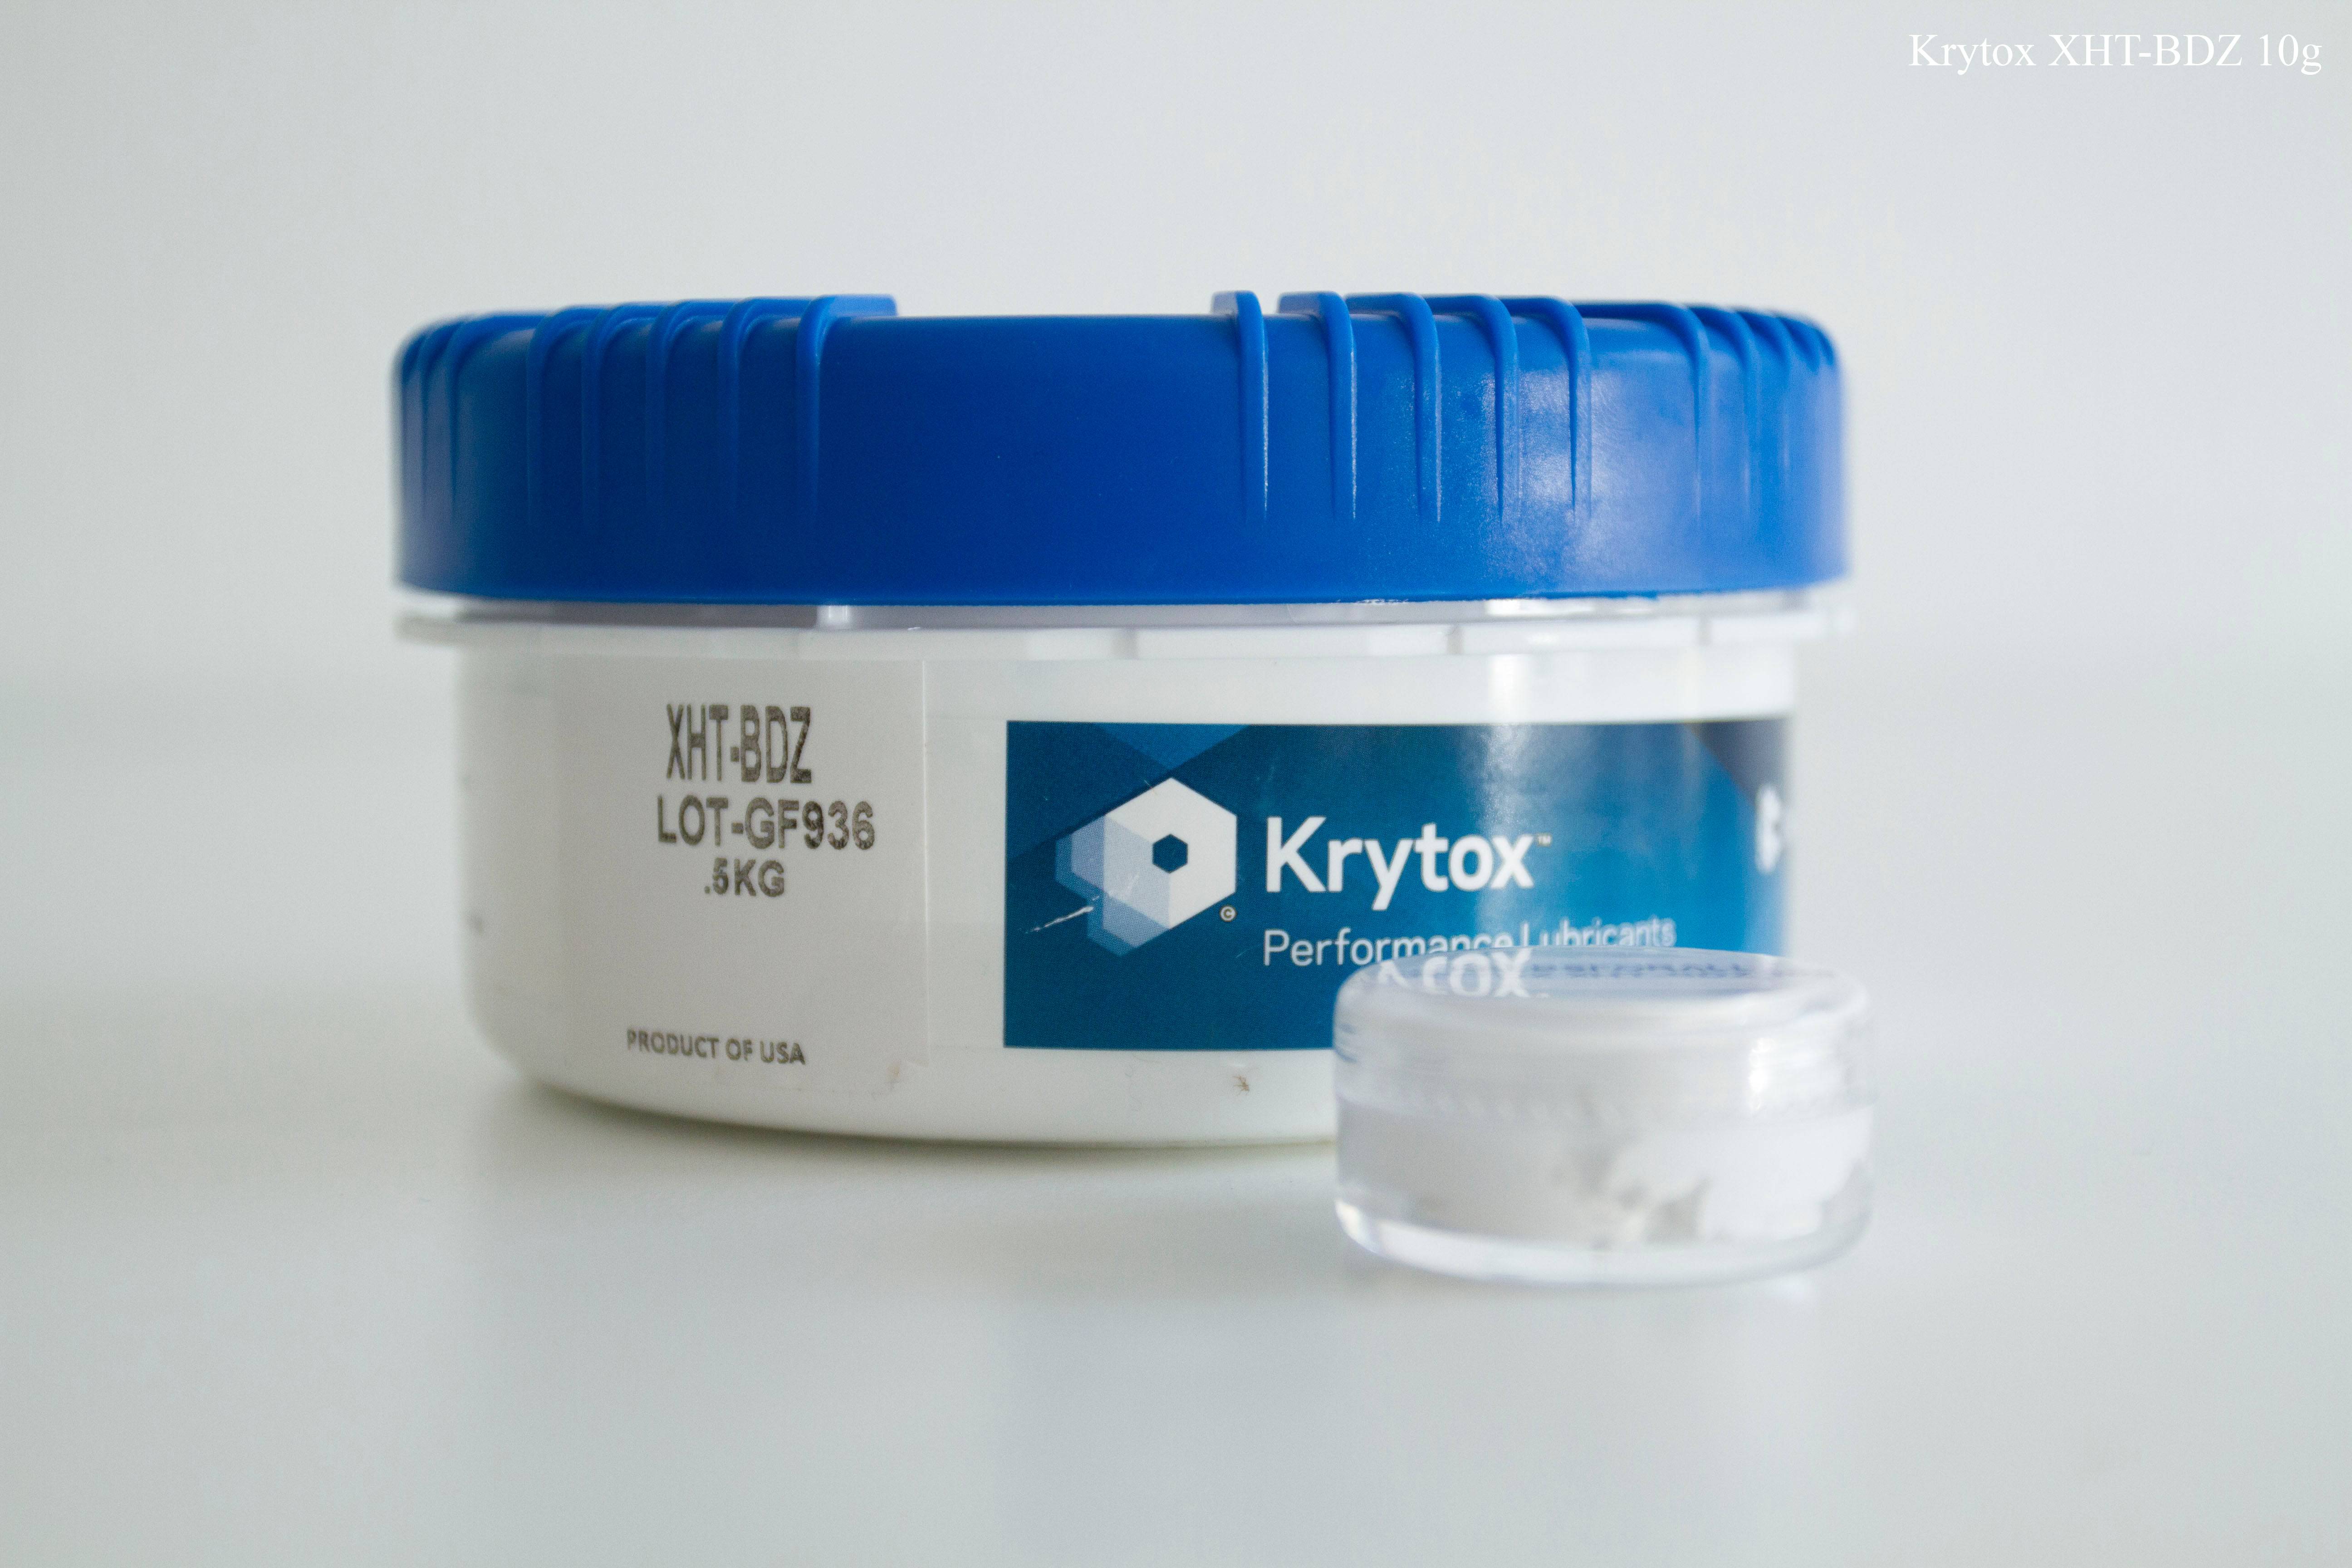 Krytox XHT-BDZ 10g. Greatly reduces stabilizer's rattles, even without modding.